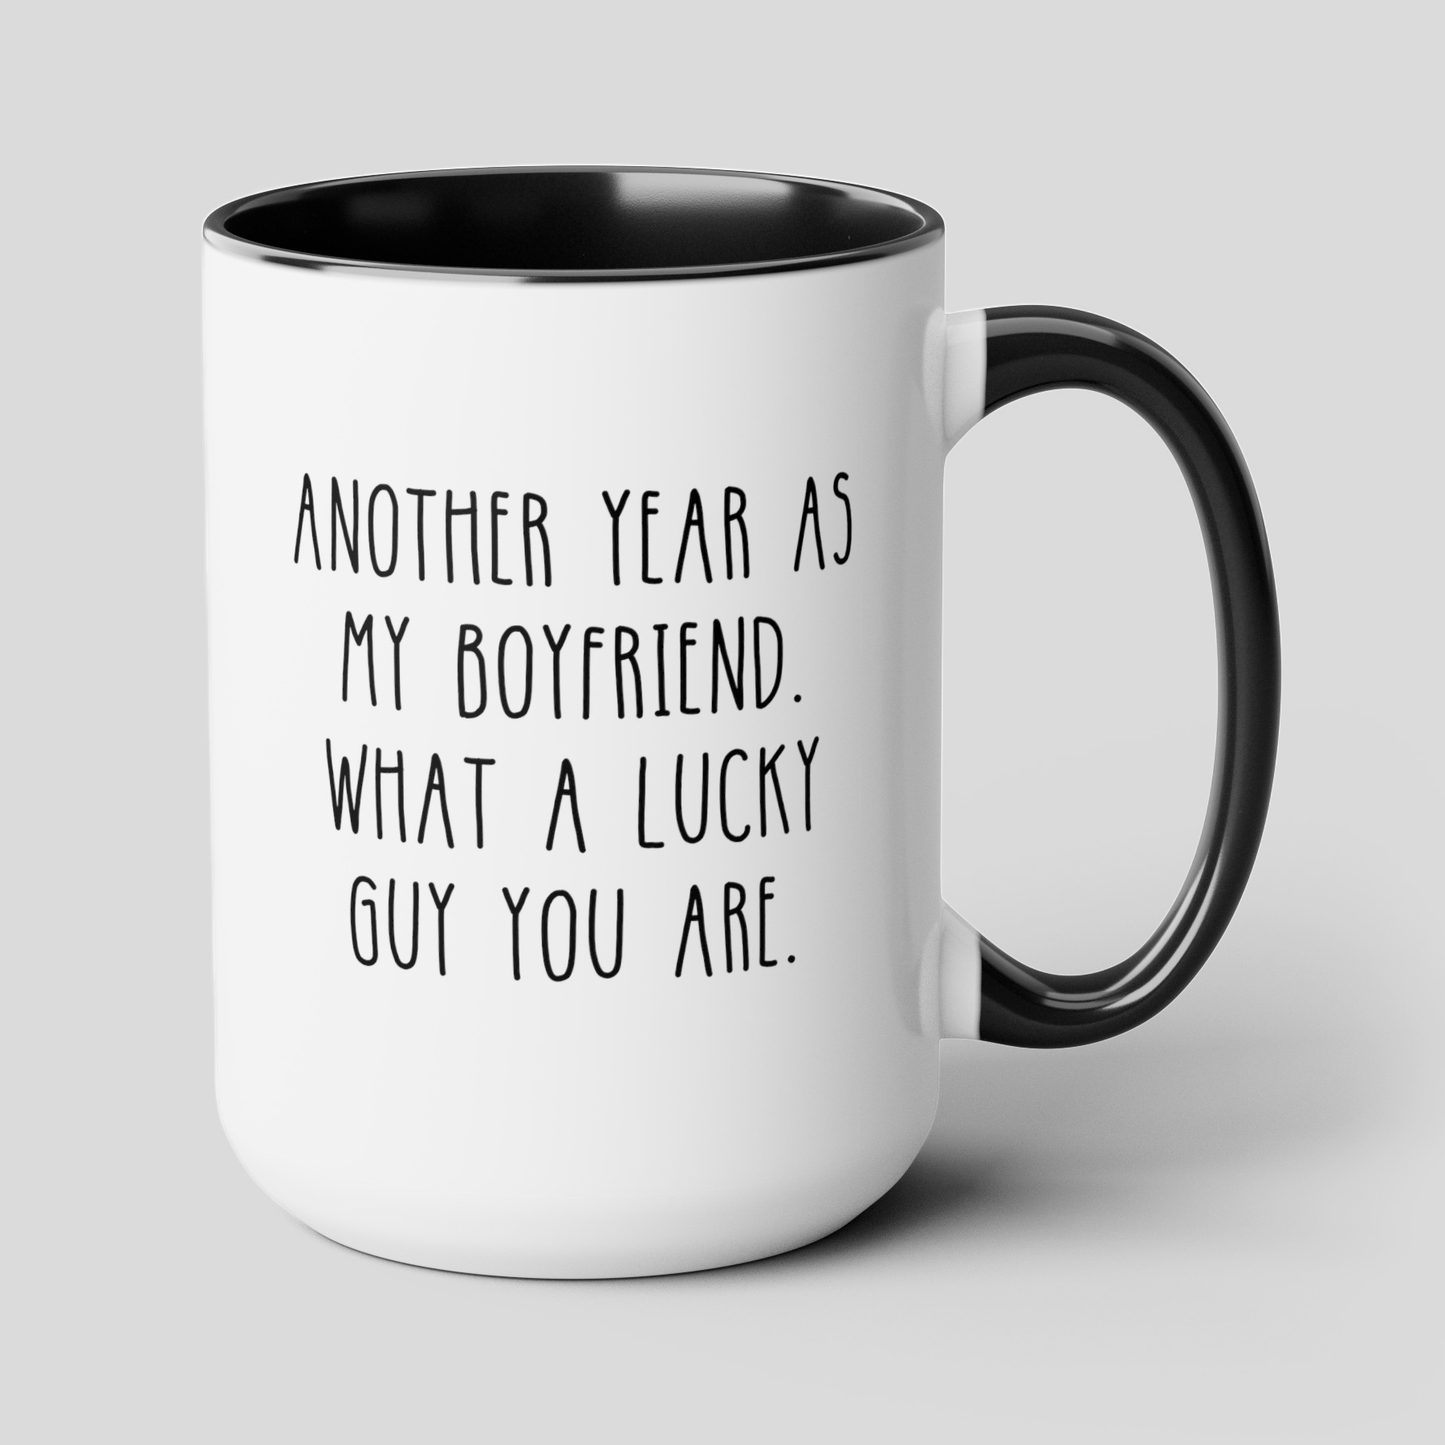 Another Year As My Boyfriend What A Lucky Guy You Are 15oz white with black accent funny large coffee mug gift for Valentines sarcastic BF anniversary waveywares wavey wares wavywares wavy wares cover